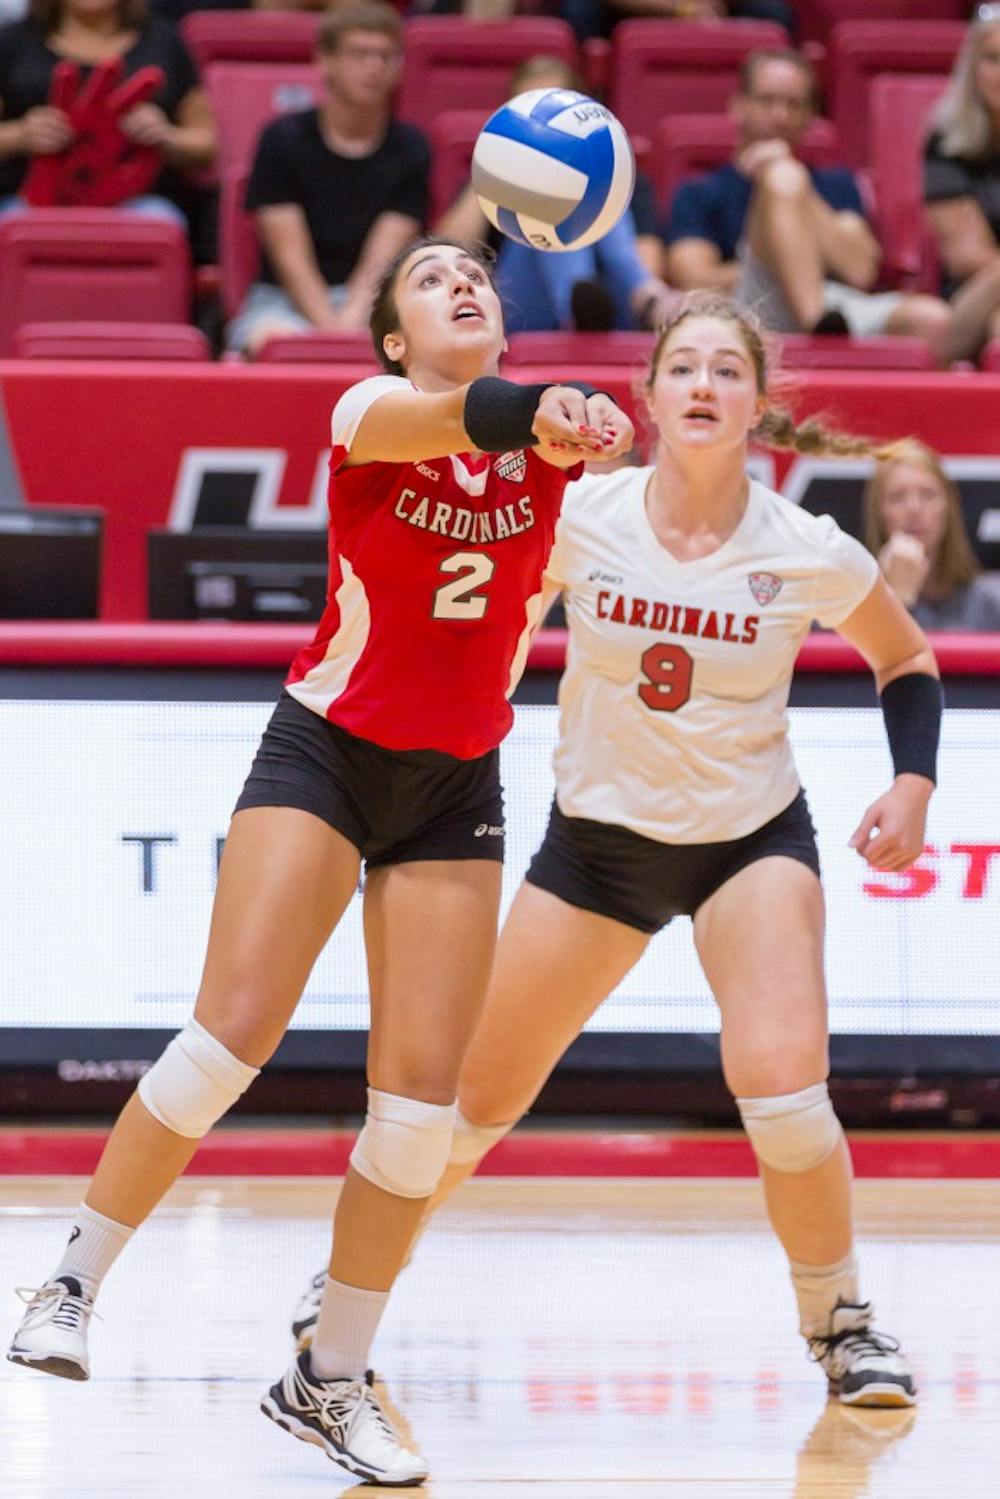 Freshman Defensive Specialist Kate Avila bumps the ball to a fellow teammate at the game against Valparaiso on Sept. 16 at John E. Worthen Arena. Kyle Crawford // DN